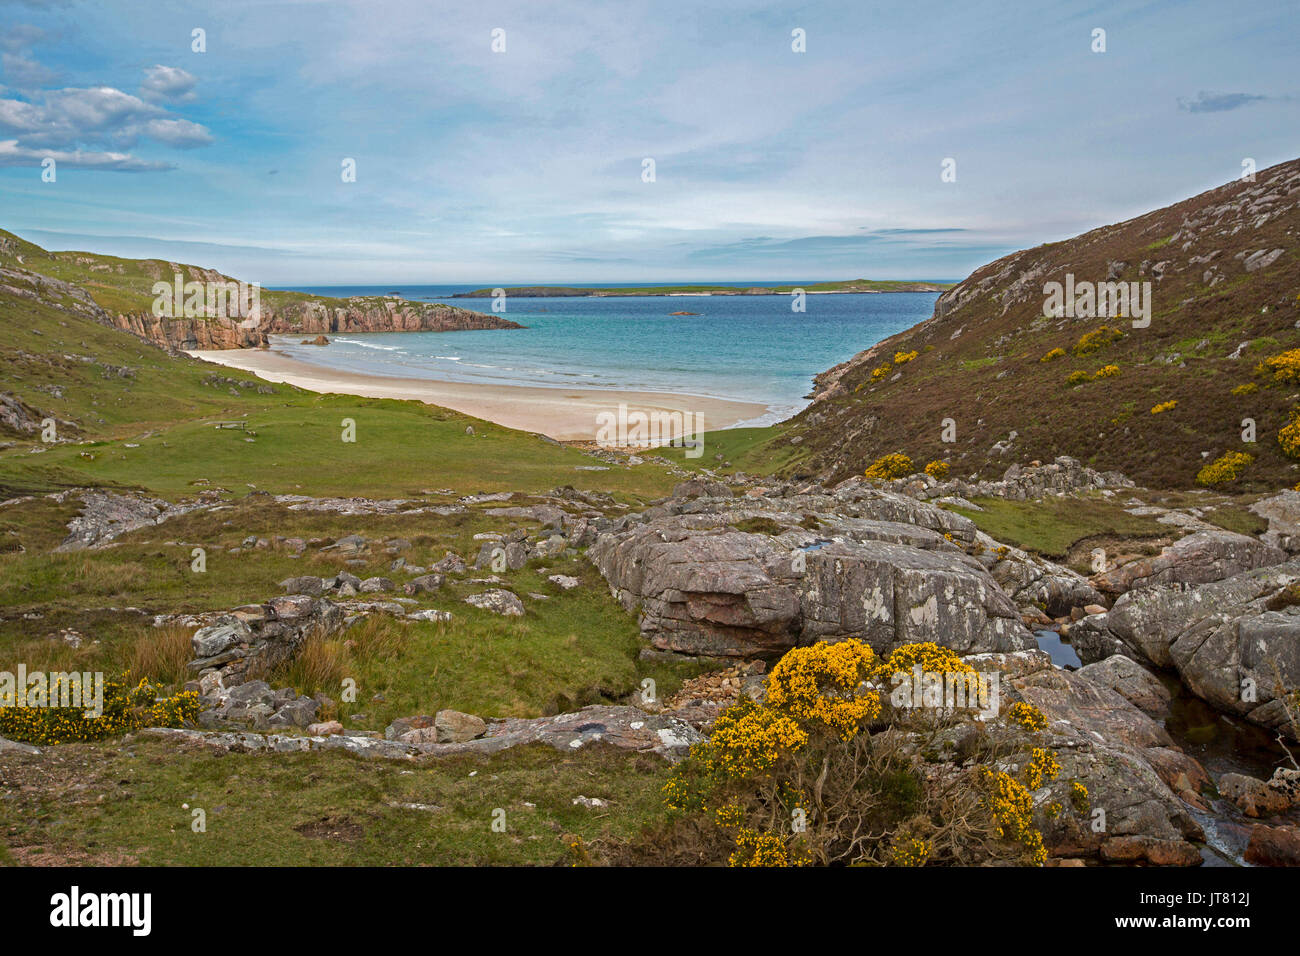 Coastal landscape with sandy beach in secluded rocky bay with foreground daubed with golden flowers of gorse under blue sky near Durness, Scotland Stock Photo